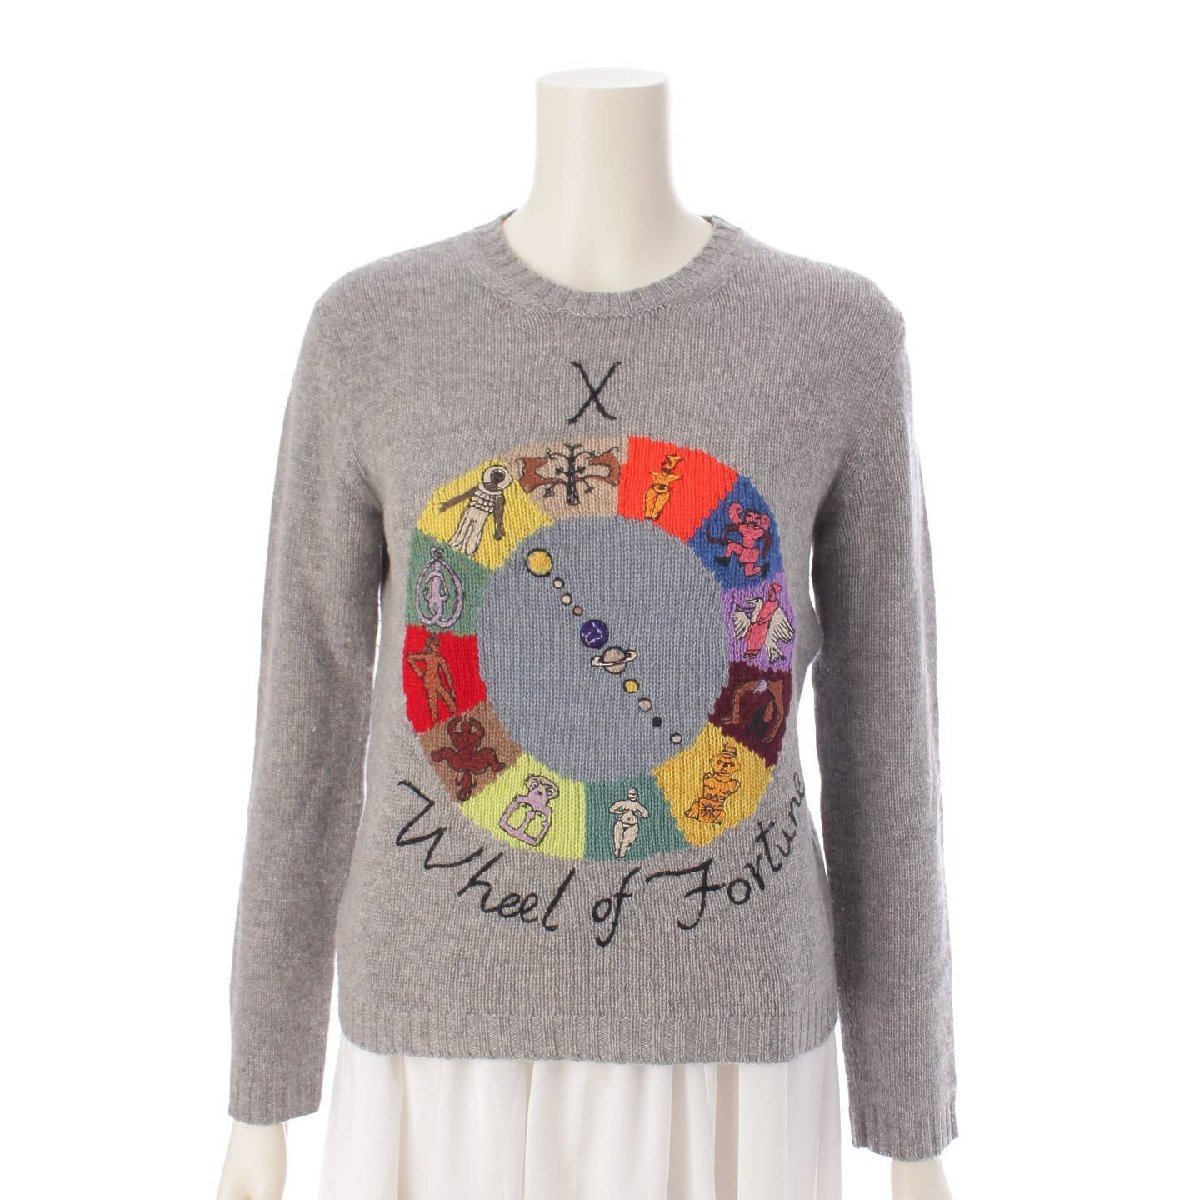 [ Christian Dior ]Christian Dior wheel of fortune cashmere long sleeve knitted sweater gray 36 [ used ][ regular goods guarantee ]202136